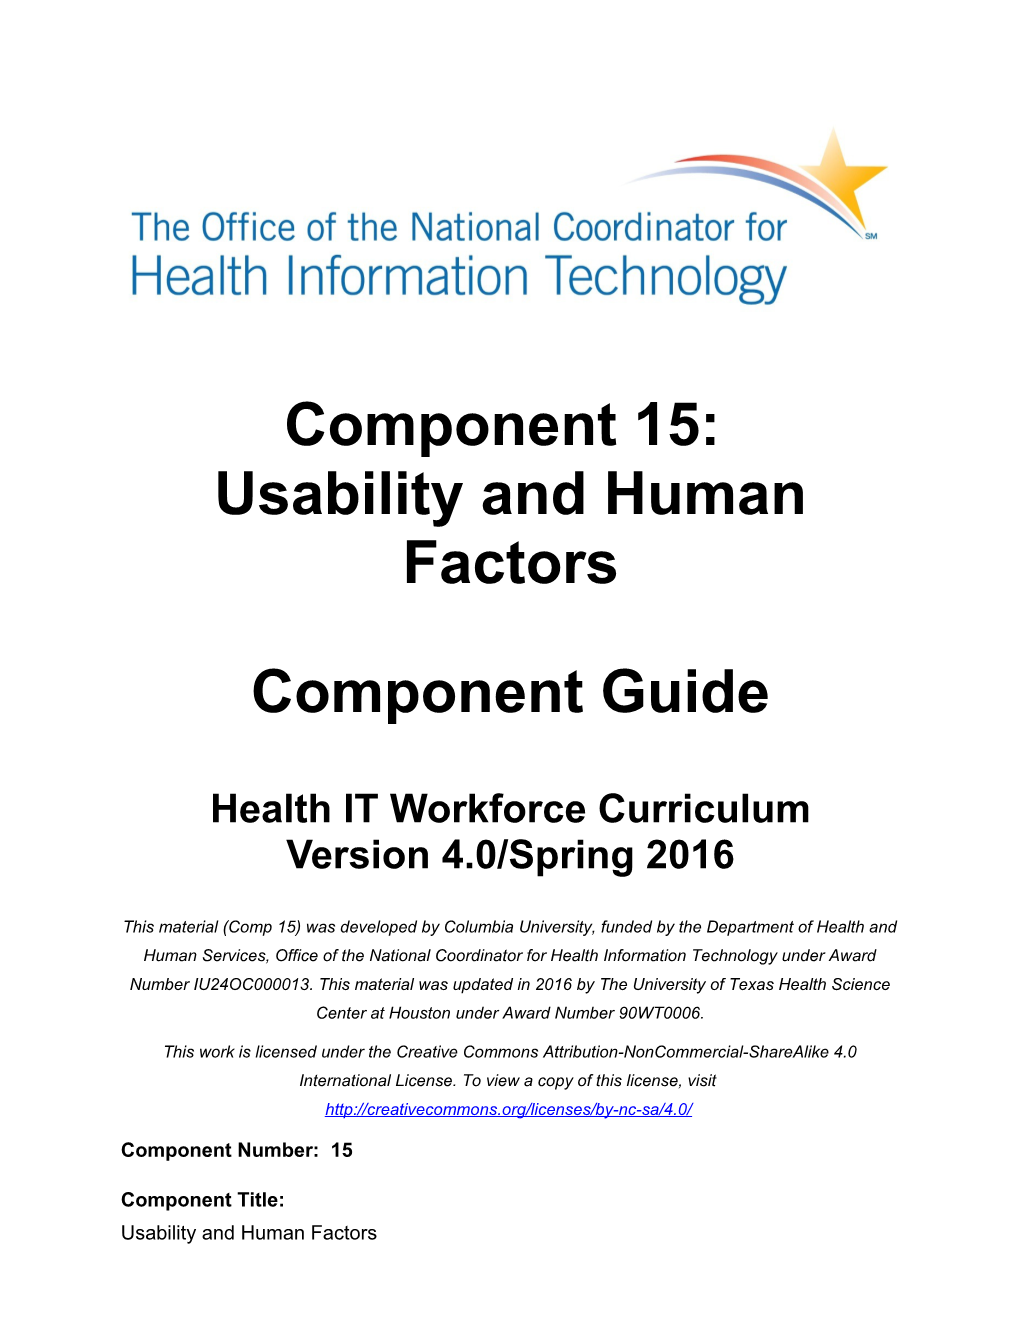 Component 15: Usability and Human Factors